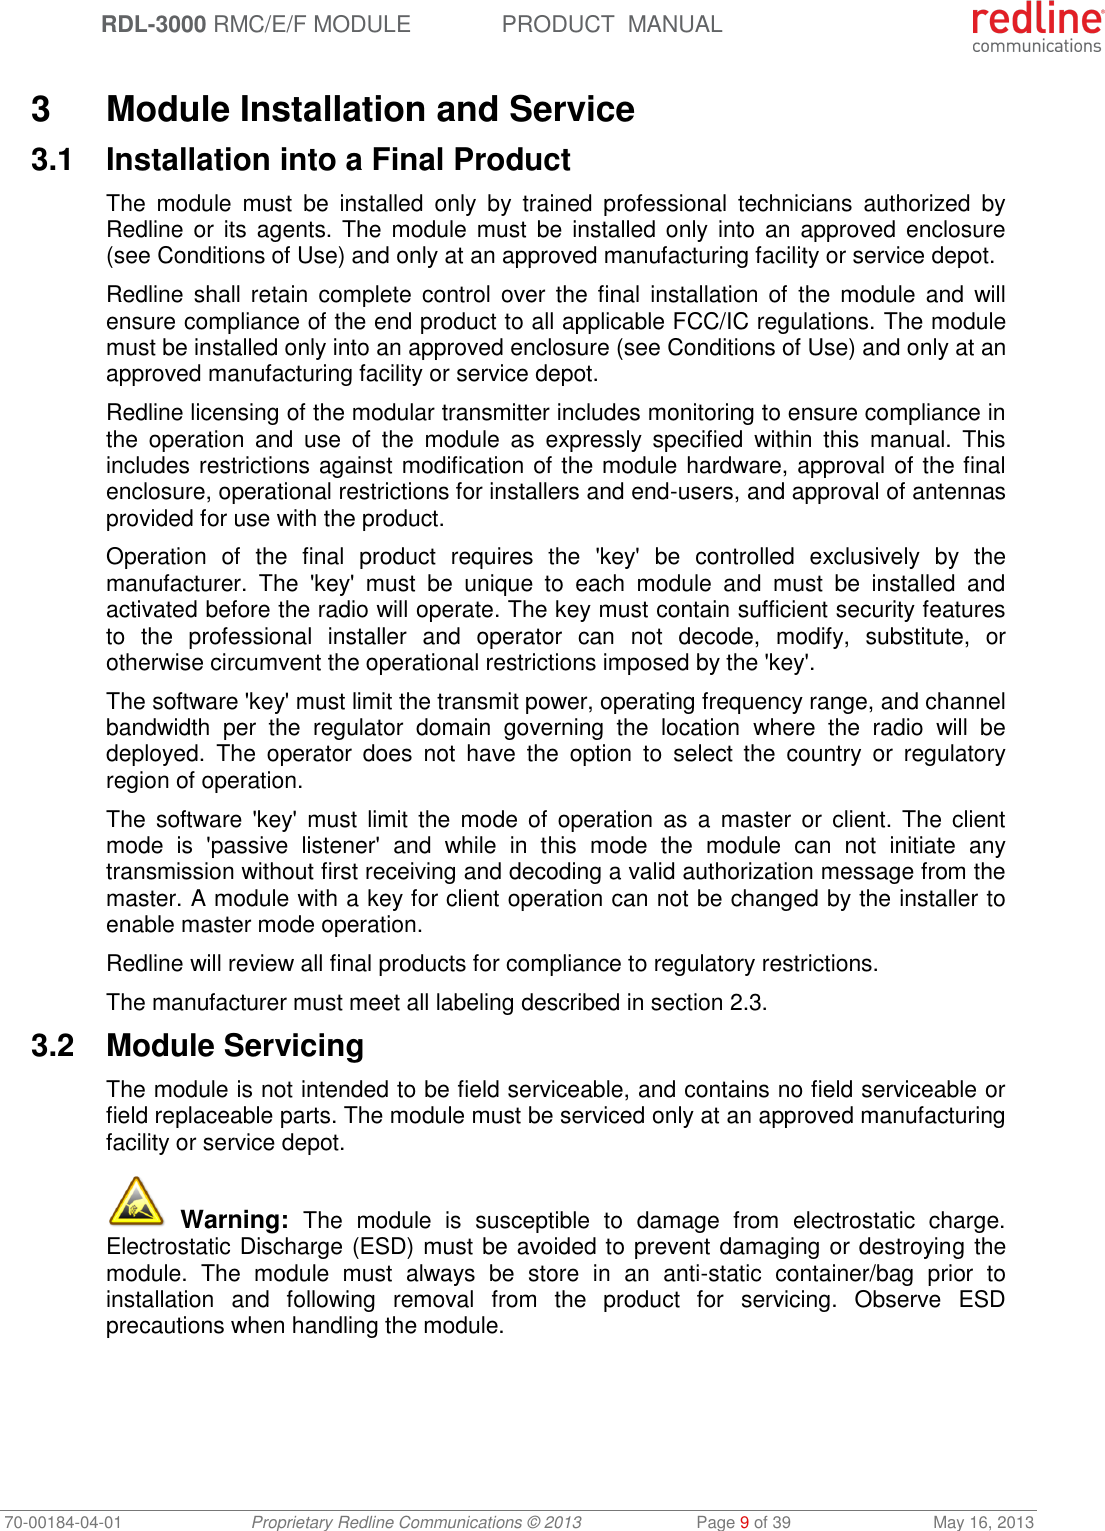  RDL-3000 RMC/E/F MODULE PRODUCT  MANUAL 70-00184-04-01 Proprietary Redline Communications © 2013  Page 9 of 39  May 16, 2013  3  Module Installation and Service 3.1  Installation into a Final Product The  module  must  be  installed  only  by  trained  professional  technicians  authorized  by Redline or  its  agents. The  module must  be  installed only  into  an  approved enclosure (see Conditions of Use) and only at an approved manufacturing facility or service depot. Redline shall  retain  complete  control  over  the  final  installation  of  the  module  and  will ensure compliance of the end product to all applicable FCC/IC regulations. The module must be installed only into an approved enclosure (see Conditions of Use) and only at an approved manufacturing facility or service depot. Redline licensing of the modular transmitter includes monitoring to ensure compliance in the  operation  and  use  of  the  module  as  expressly  specified  within  this  manual.  This includes restrictions against modification of the module hardware, approval of the final enclosure, operational restrictions for installers and end-users, and approval of antennas provided for use with the product. Operation  of  the  final  product  requires  the  &apos;key&apos;  be  controlled  exclusively  by  the manufacturer.  The  &apos;key&apos;  must  be  unique  to  each  module  and  must  be  installed  and activated before the radio will operate. The key must contain sufficient security features to  the  professional  installer  and  operator  can  not  decode,  modify,  substitute,  or otherwise circumvent the operational restrictions imposed by the &apos;key&apos;.  The software &apos;key&apos; must limit the transmit power, operating frequency range, and channel bandwidth  per  the  regulator  domain  governing  the  location  where  the  radio  will  be deployed.  The  operator  does  not  have  the  option  to  select  the  country  or  regulatory region of operation. The  software &apos;key&apos;  must  limit  the  mode  of  operation  as  a  master  or  client. The  client mode  is  &apos;passive  listener&apos;  and  while  in  this  mode  the  module  can  not  initiate  any transmission without first receiving and decoding a valid authorization message from the master. A module with a key for client operation can not be changed by the installer to enable master mode operation. Redline will review all final products for compliance to regulatory restrictions. The manufacturer must meet all labeling described in section 2.3. 3.2  Module Servicing The module is not intended to be field serviceable, and contains no field serviceable or field replaceable parts. The module must be serviced only at an approved manufacturing facility or service depot.  Warning:  The  module  is  susceptible  to  damage  from  electrostatic  charge. Electrostatic Discharge (ESD) must be avoided to prevent damaging or destroying the module.  The  module  must  always  be  store  in  an  anti-static  container/bag  prior  to installation  and  following  removal  from  the  product  for  servicing.  Observe  ESD precautions when handling the module. 